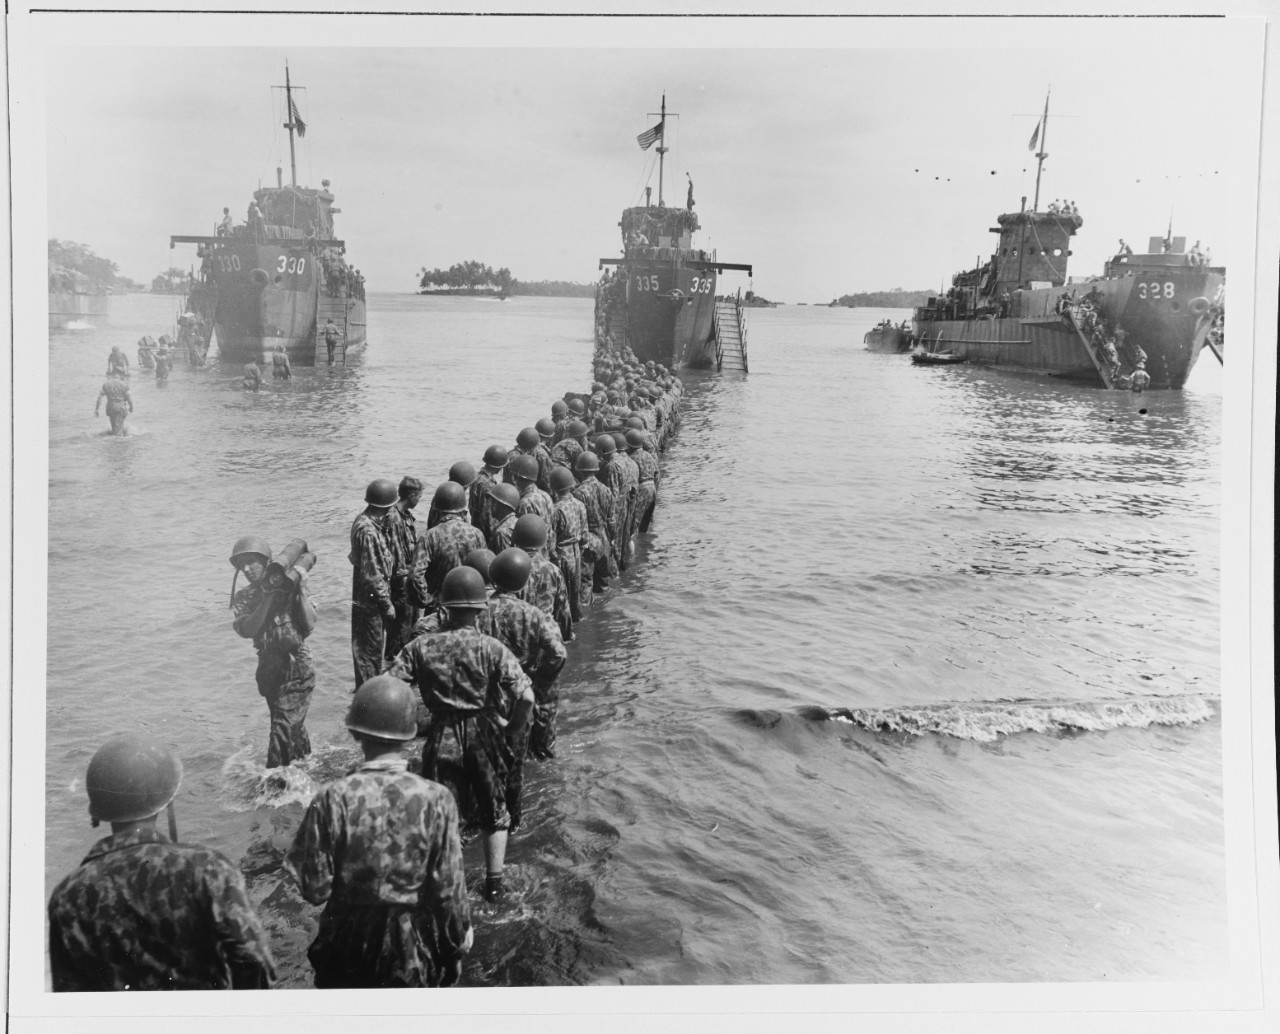 Troops unloading ammunition from LCI-330, 335, and 328 during landing operations at Rendova Island, 30 June 1943.